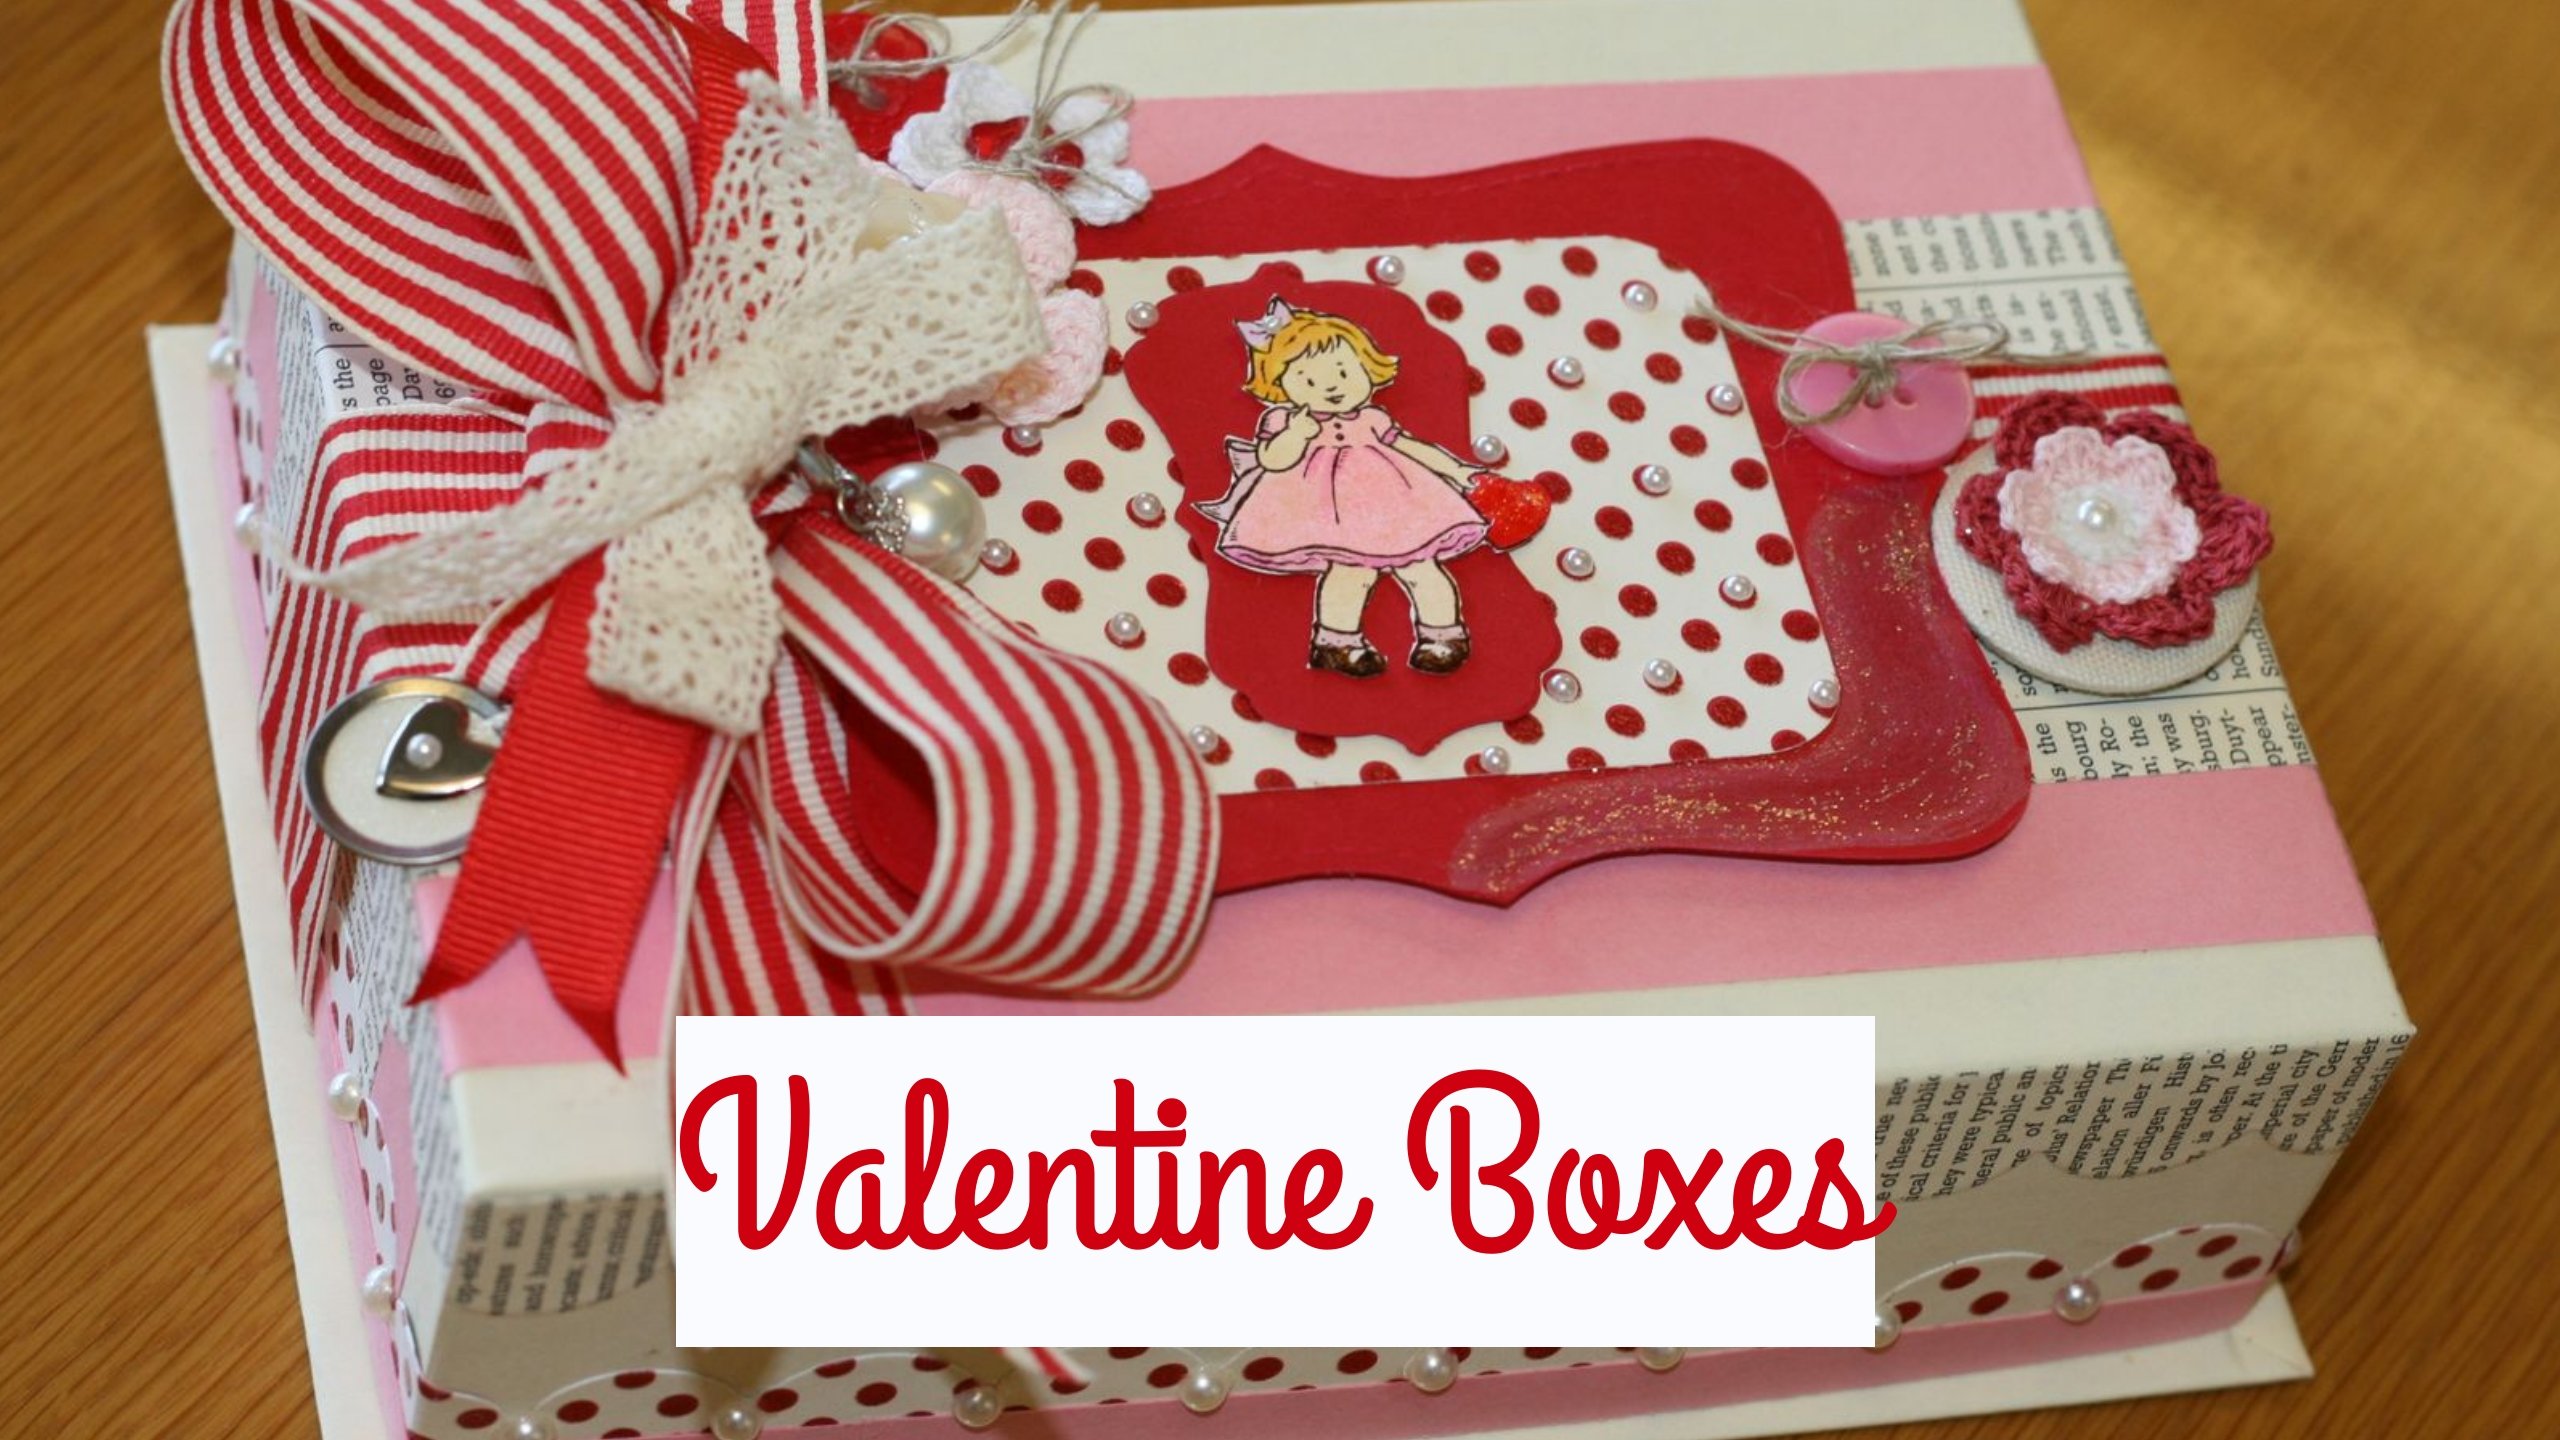 How to Make and Decorate Valentine Boxes - Furniture, Home Decor, Interior Design & Gift Ideas